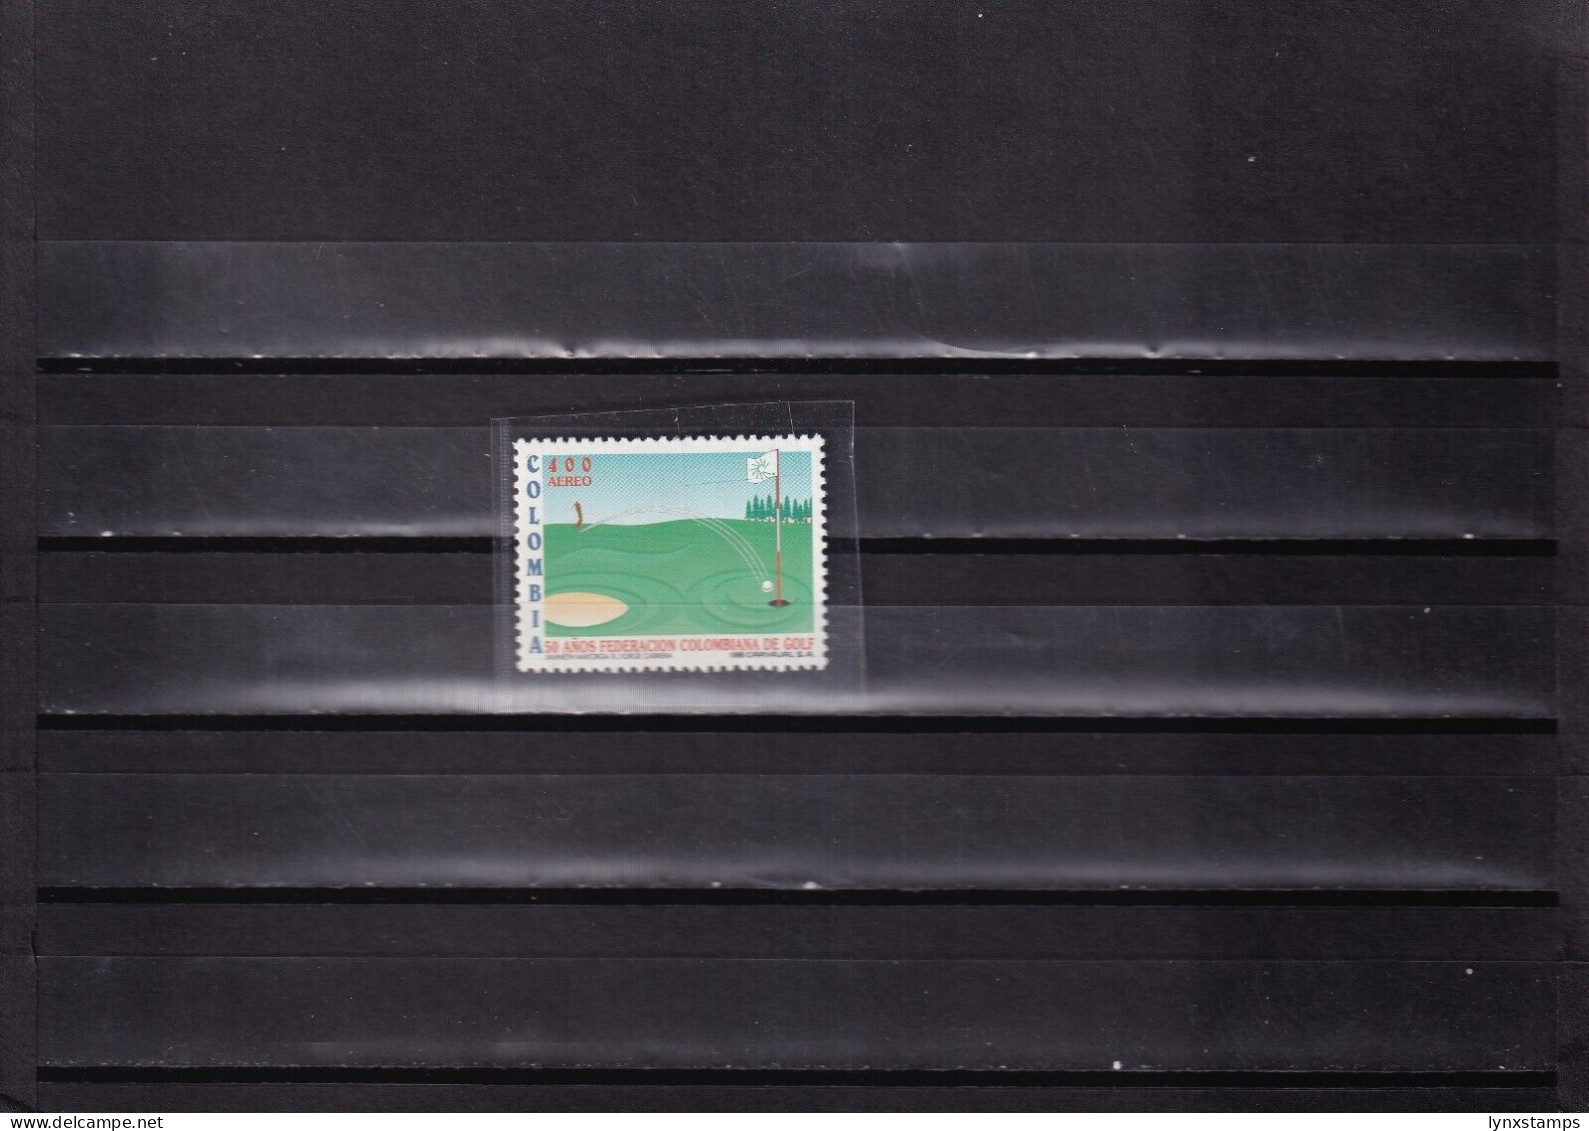 ER03 Colombia 1996 Colombian Golf Federation 50th Anniv. MNH Stamp - Kolumbien